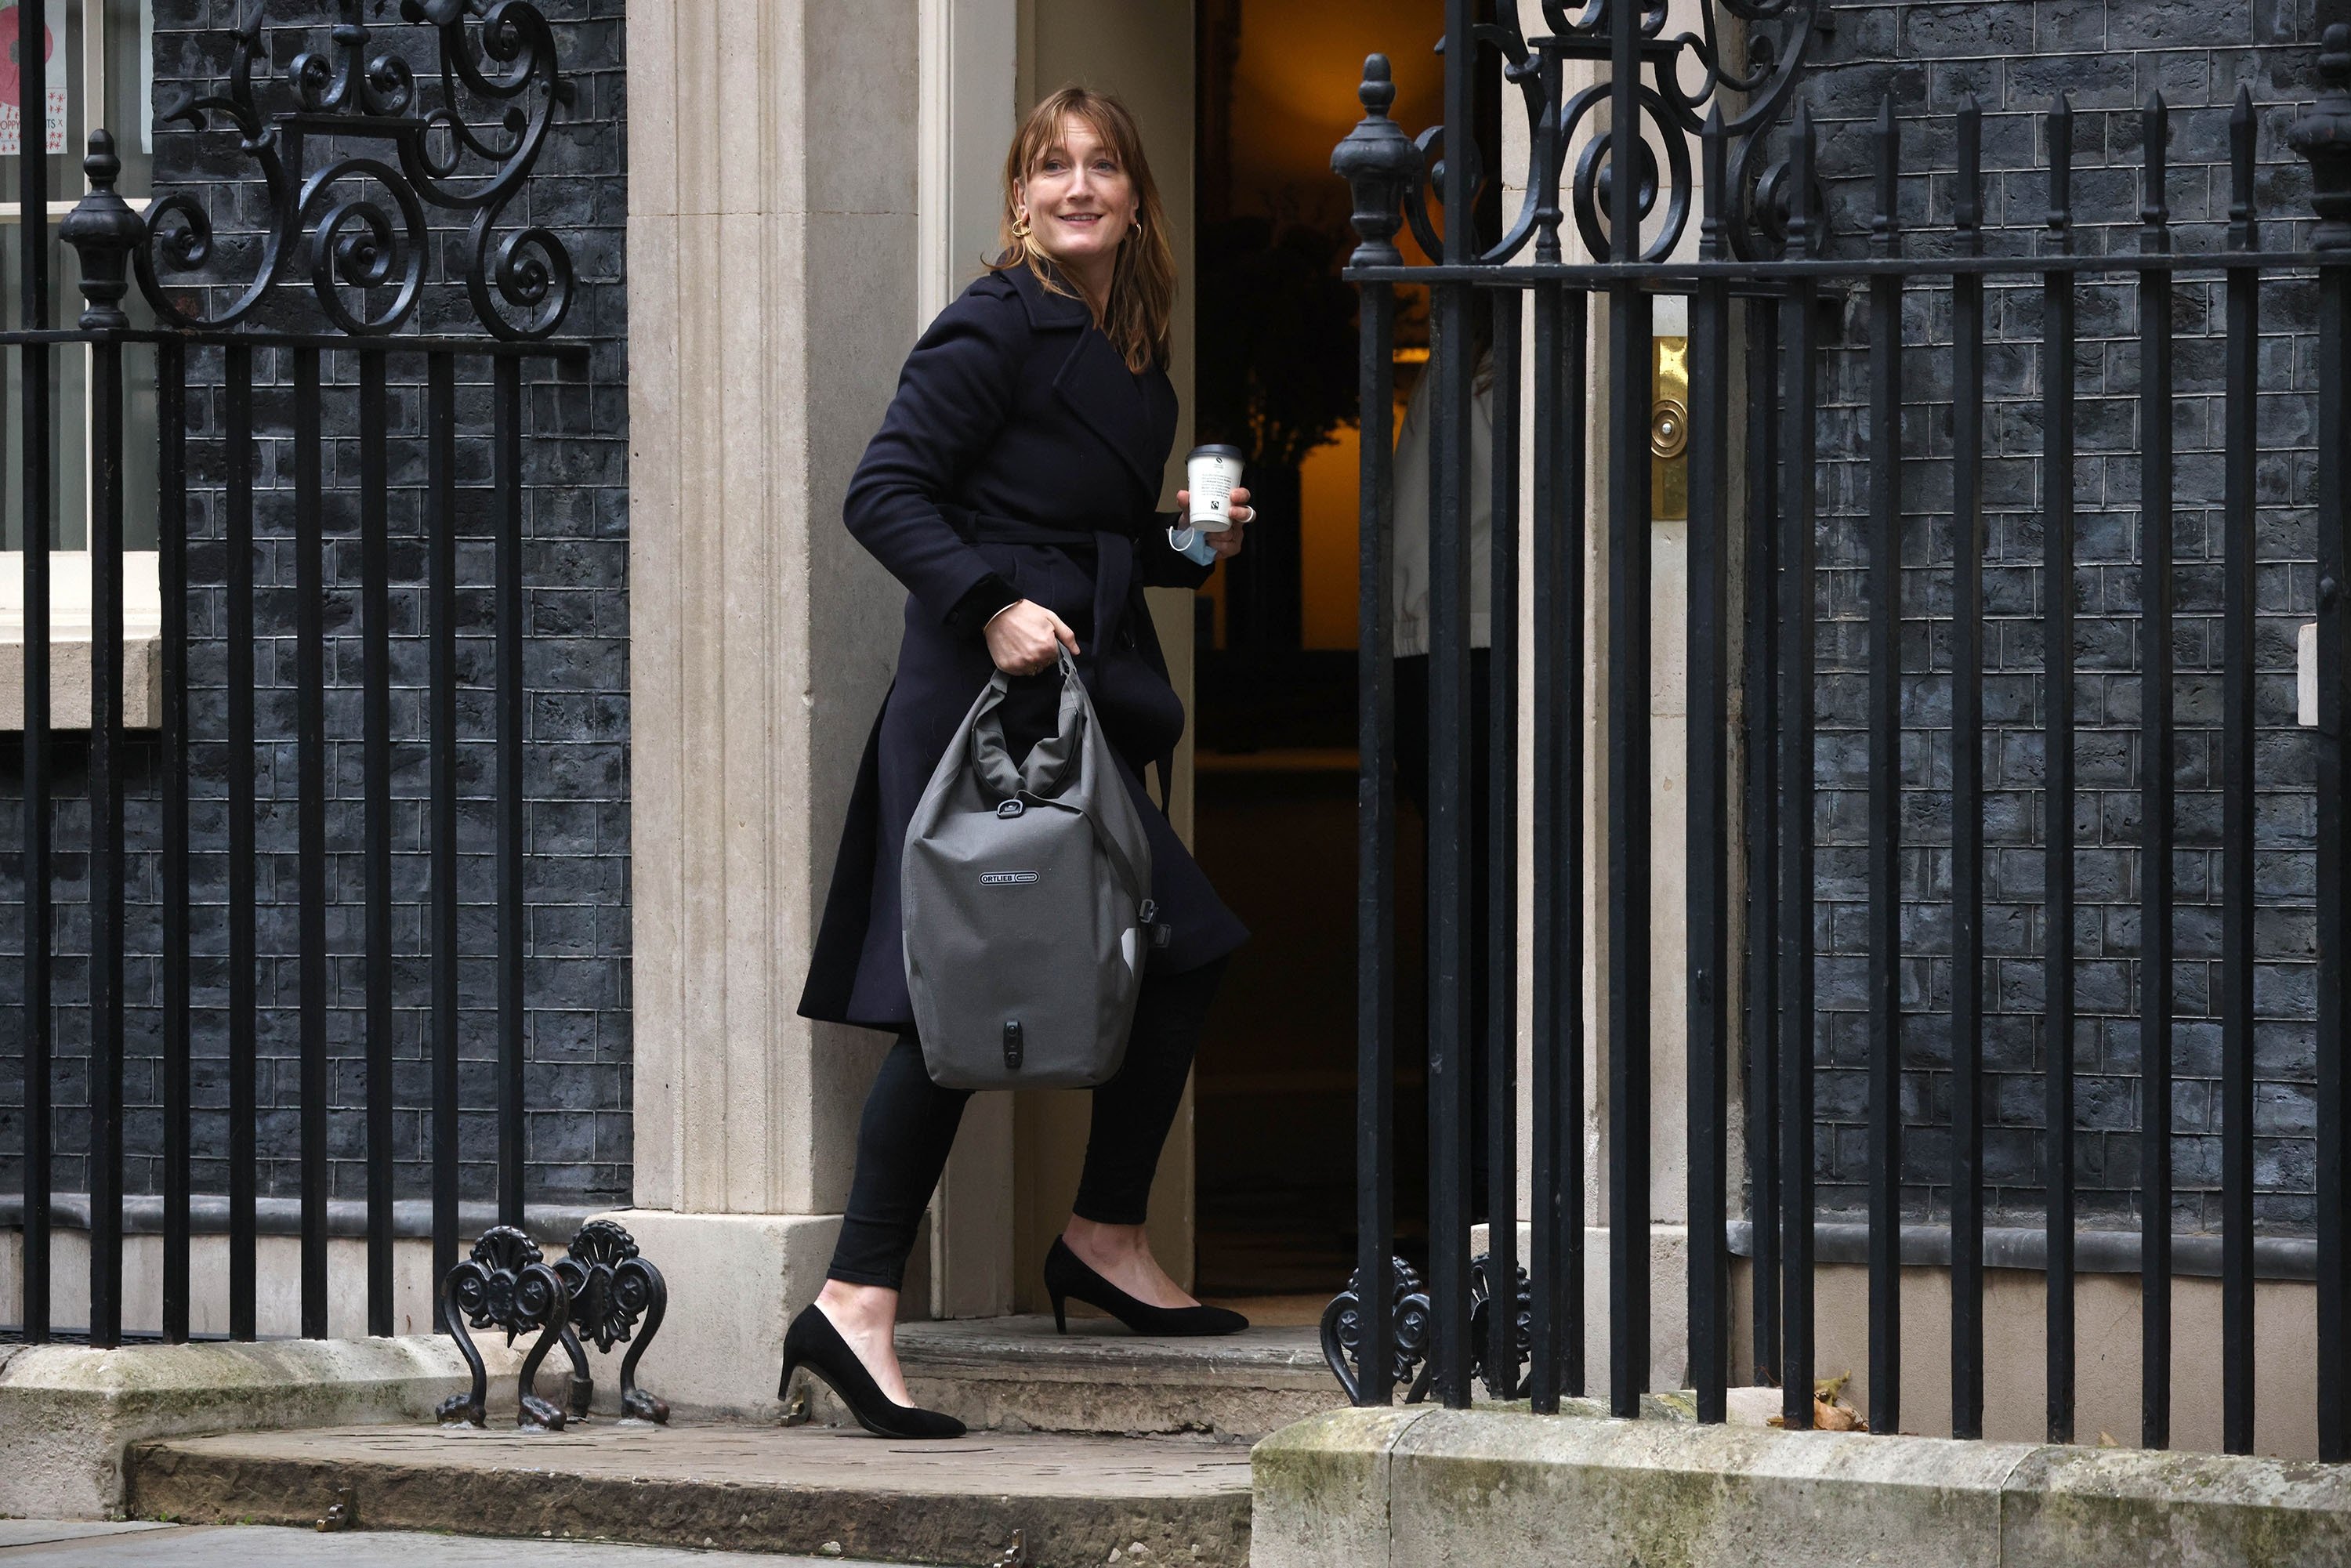 Downing Street Press Secretary Allegra Stratton arrives at 10 Downing Street on November 12, 2020 in London, United Kingdom. (Getty Images) 